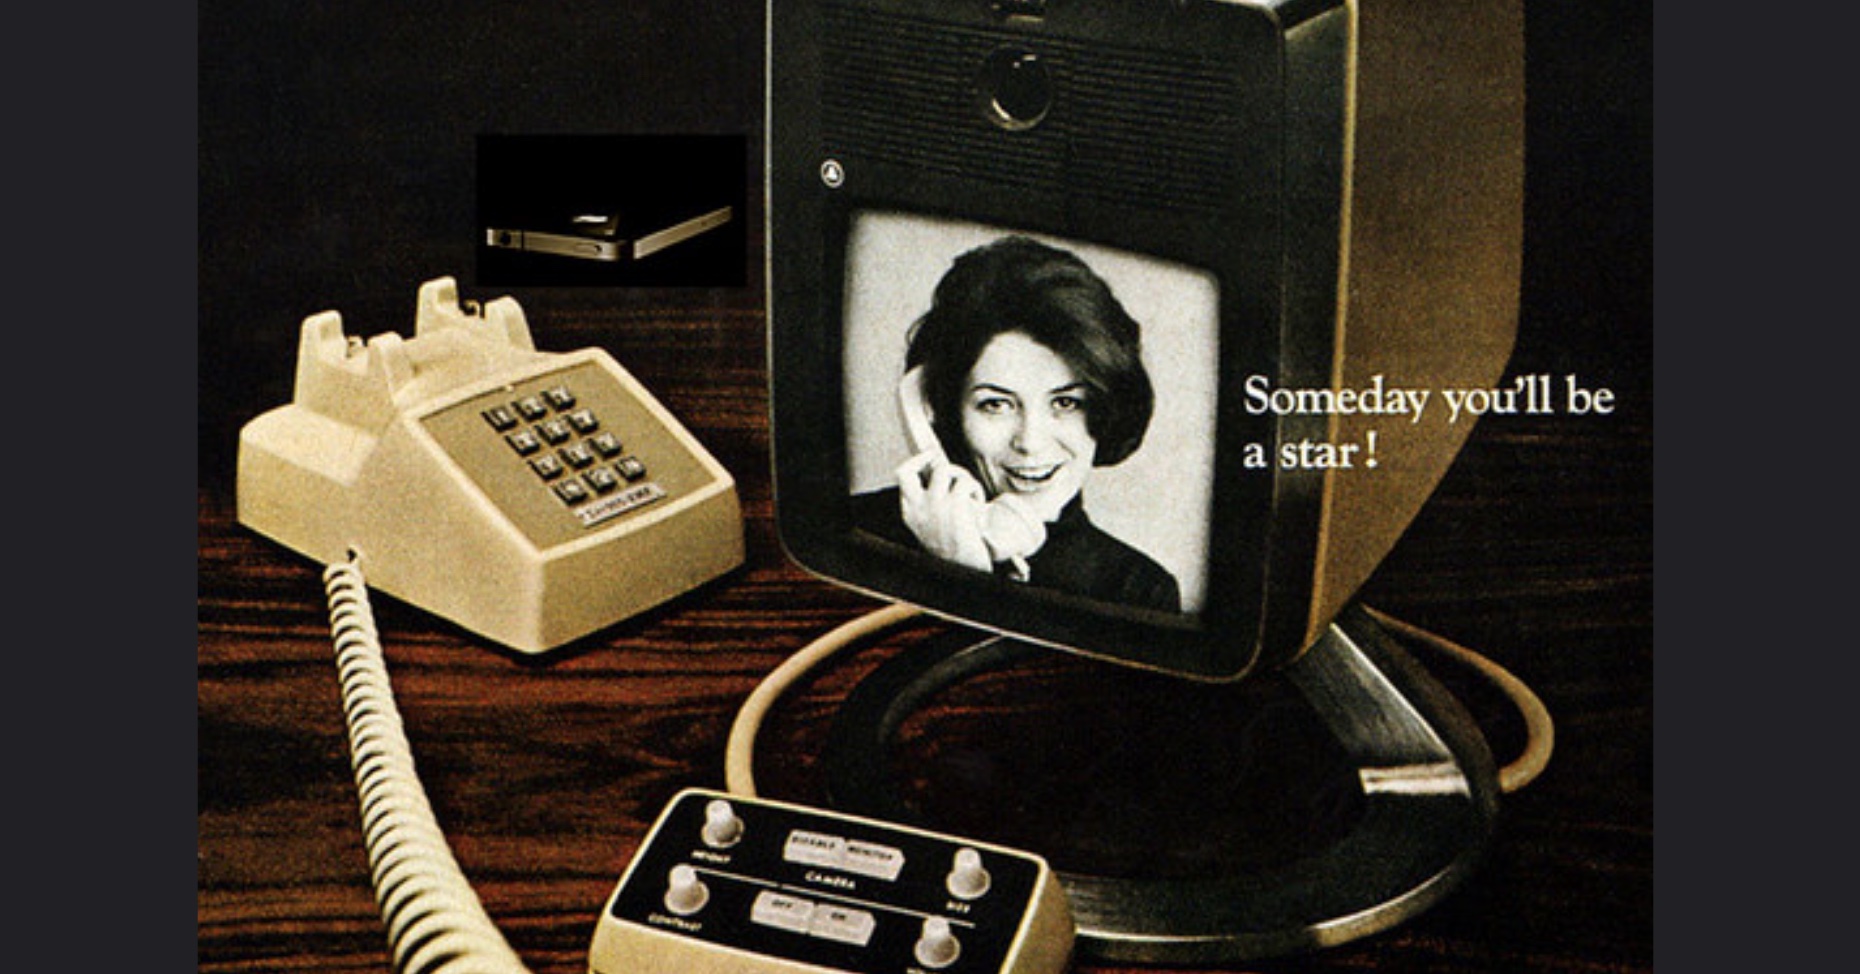 A retro scene featuring a beige rotary phone, an early video calling device displaying a woman's photo, and a control panel. The text reads, "Someday you'll be a star!.